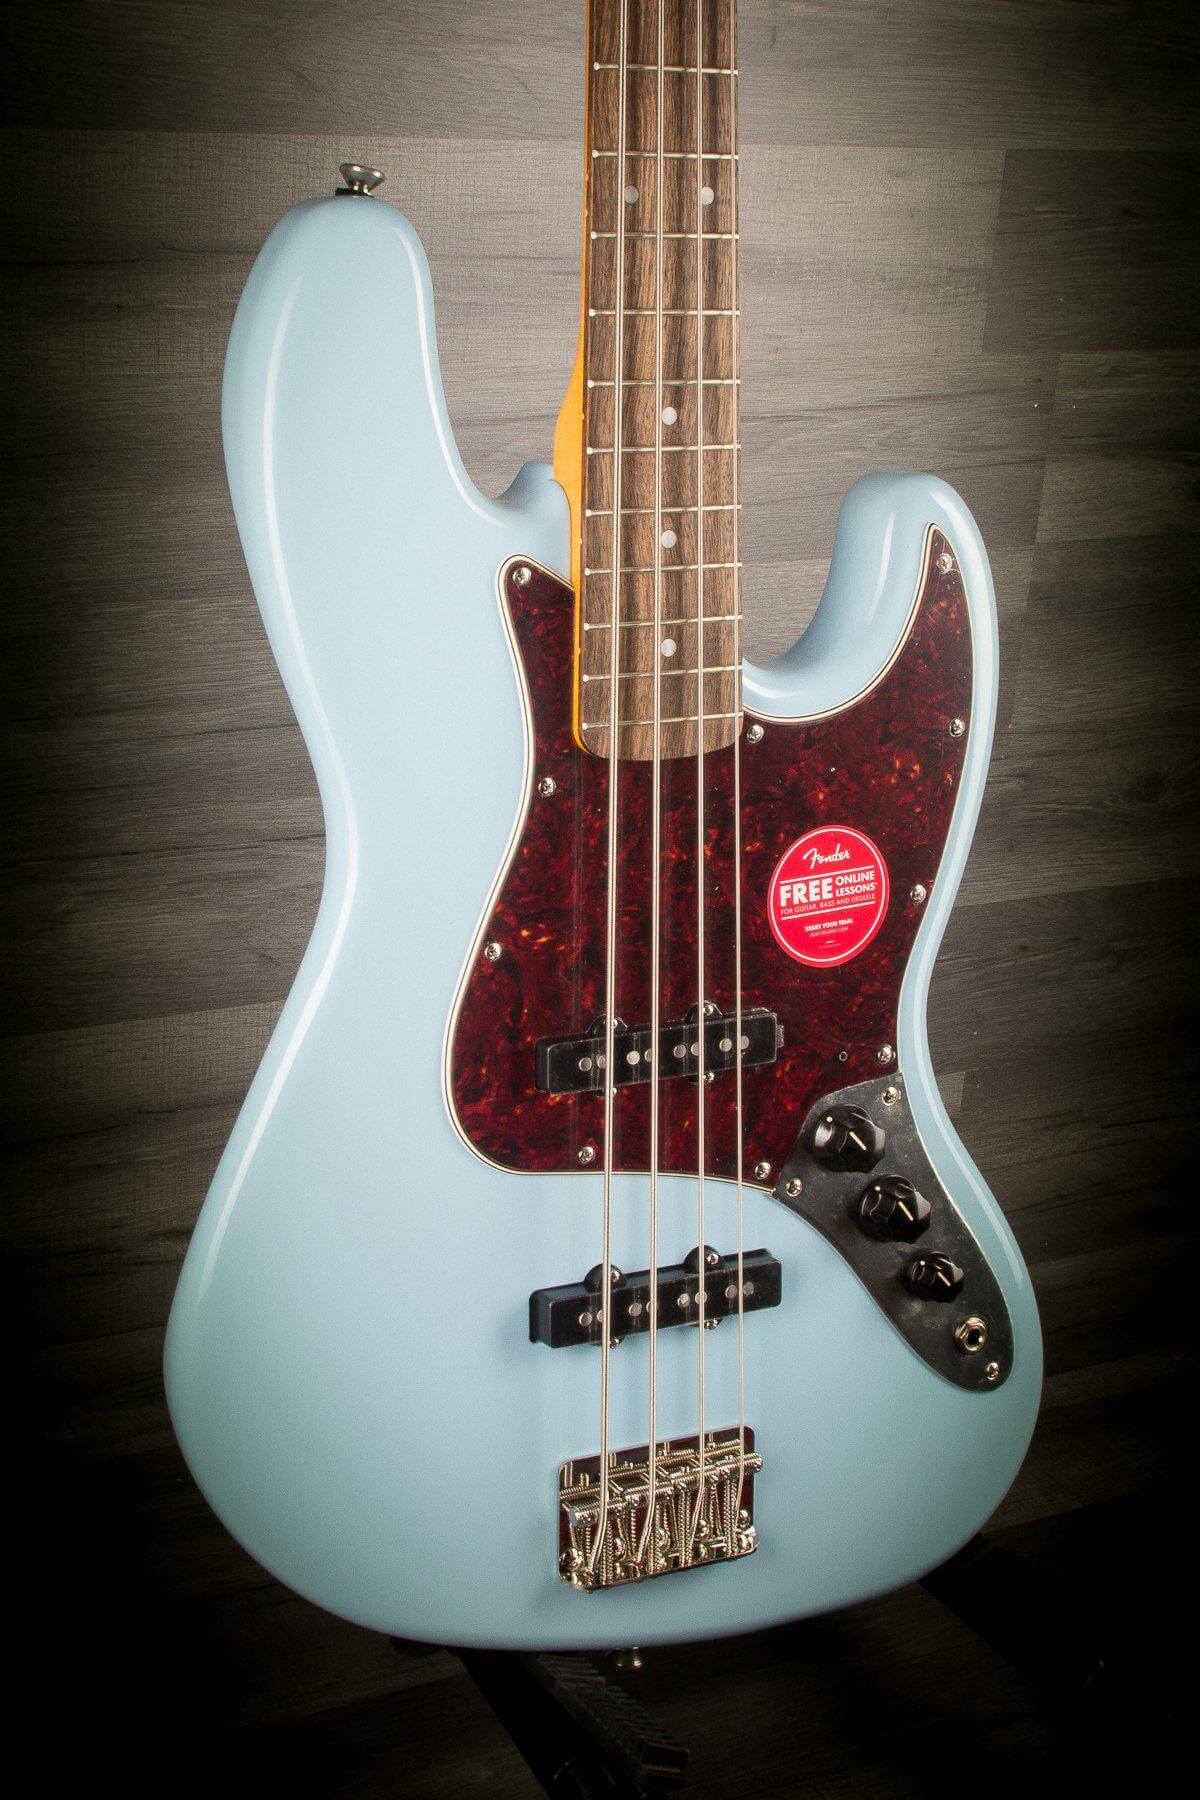 Squier Electric Guitar Squier - Classic Vibe 60's Jazz Bass - Daphne Blue